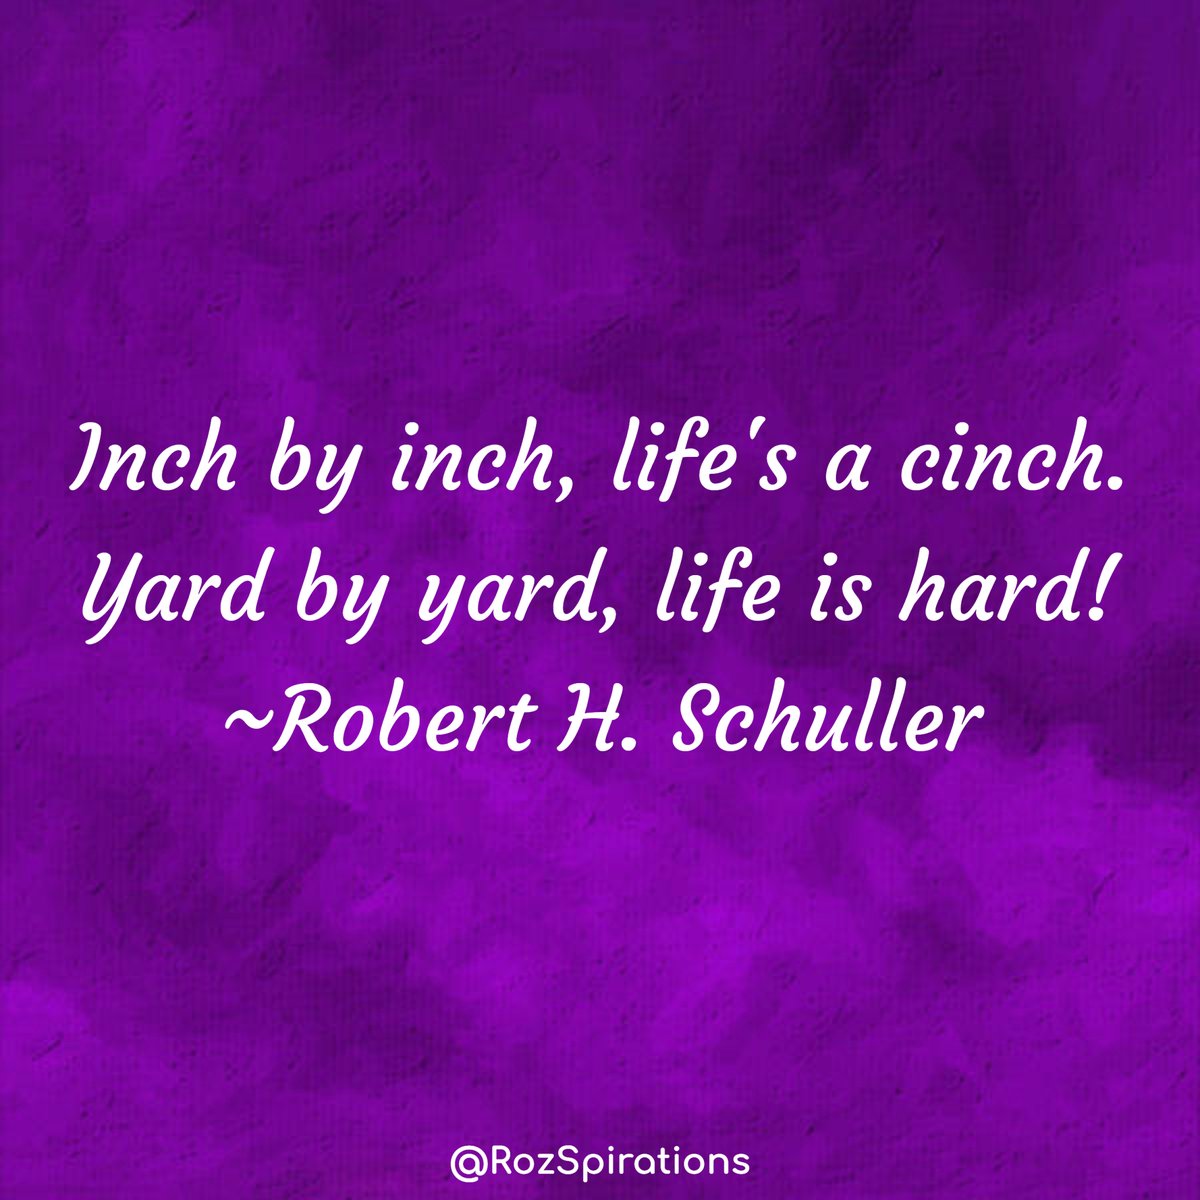 Inch by inch, life's a cinch. Yard by yard, life is hard! ~Robert H. Schuller #ThinkBIGSundayWithMarsha #RozSpirations #joytrain #lovetrain #qotd Chunk things down into do-able portions. You will gain incentive to continue on with every progress!